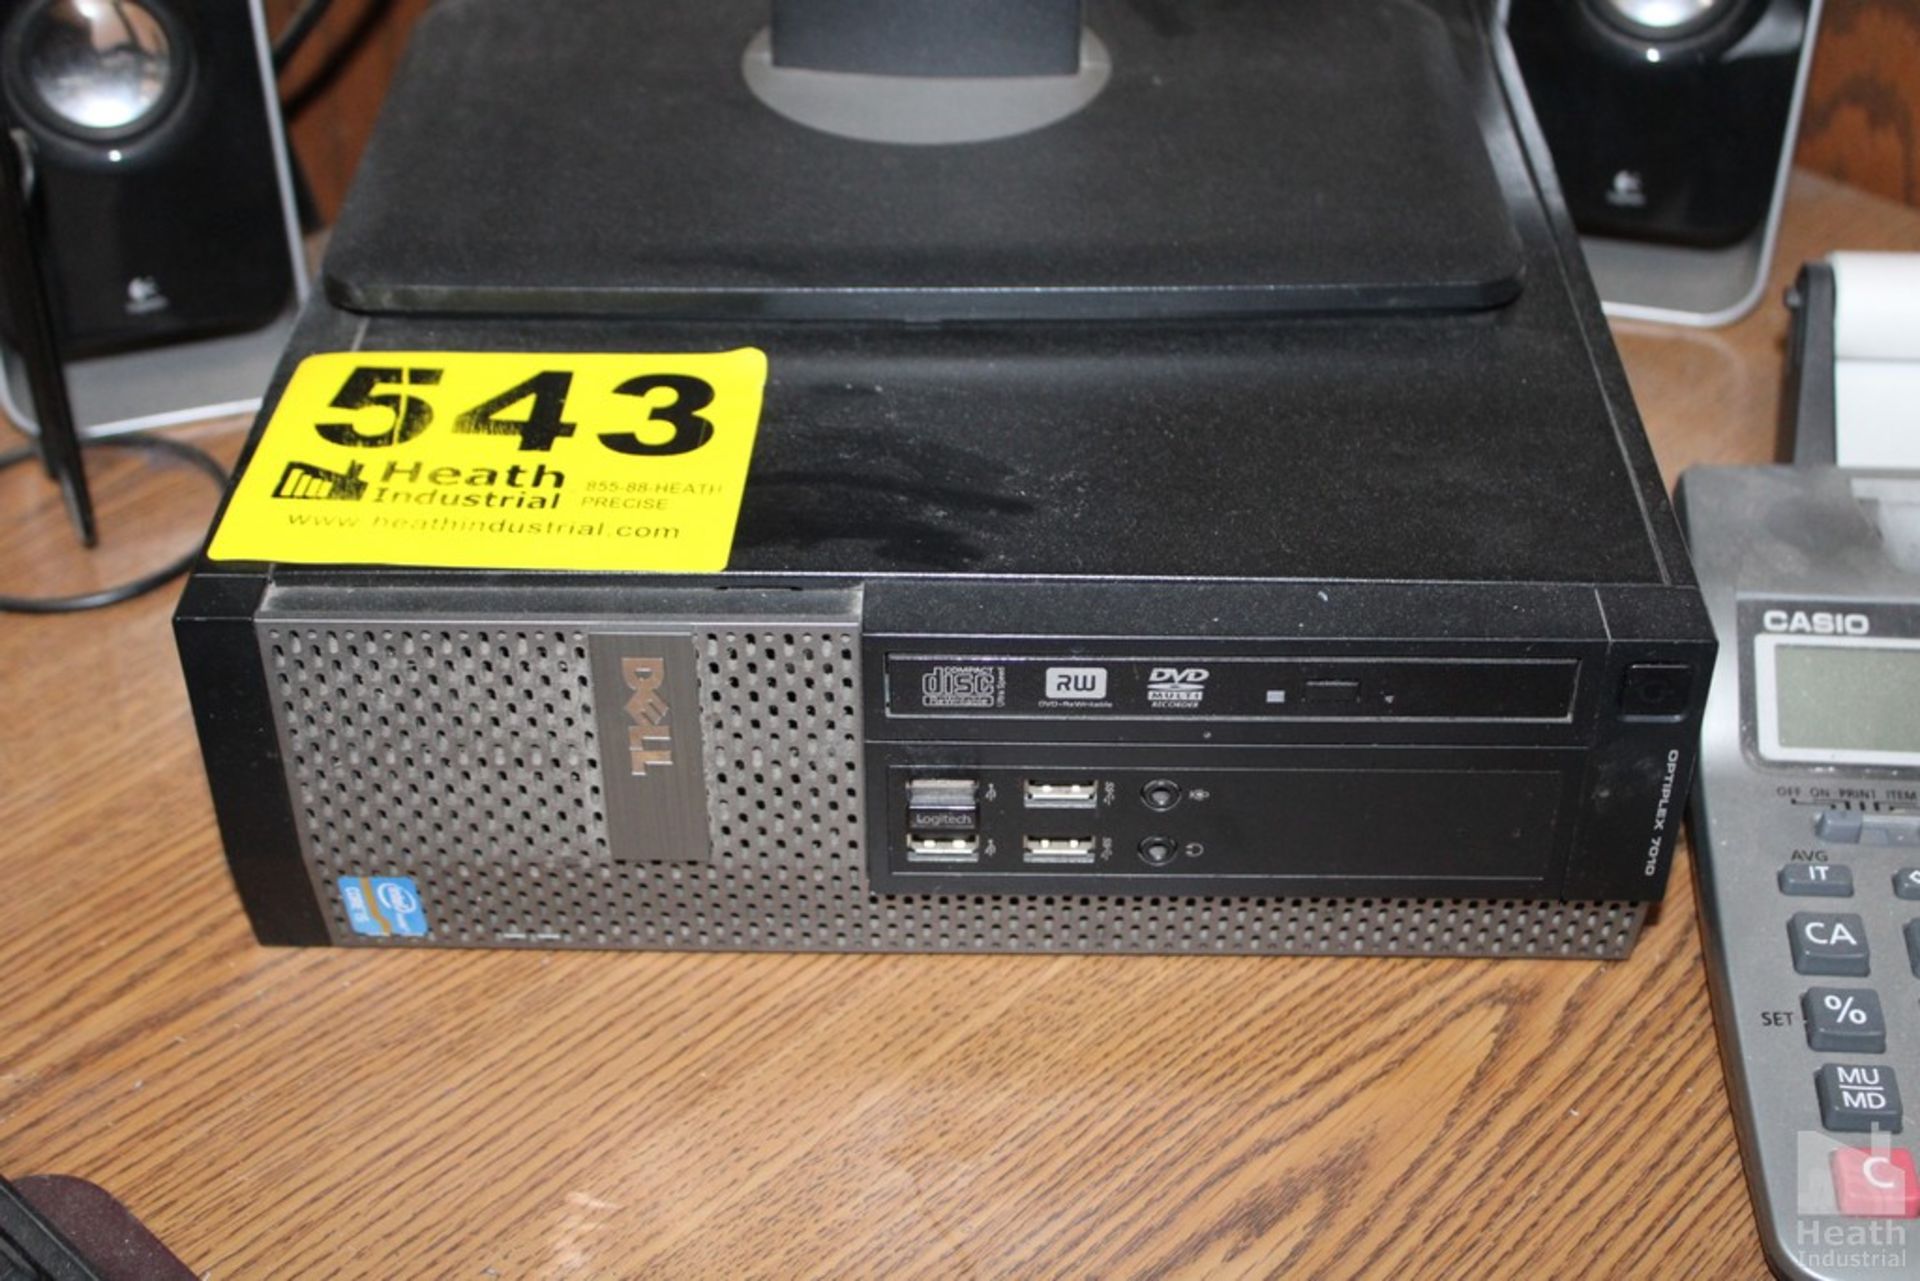 DELL OPTIPLEX 7010 WITH FLATSCREEN MONITOR, SPEAKERS AND MOUSE - Image 2 of 2